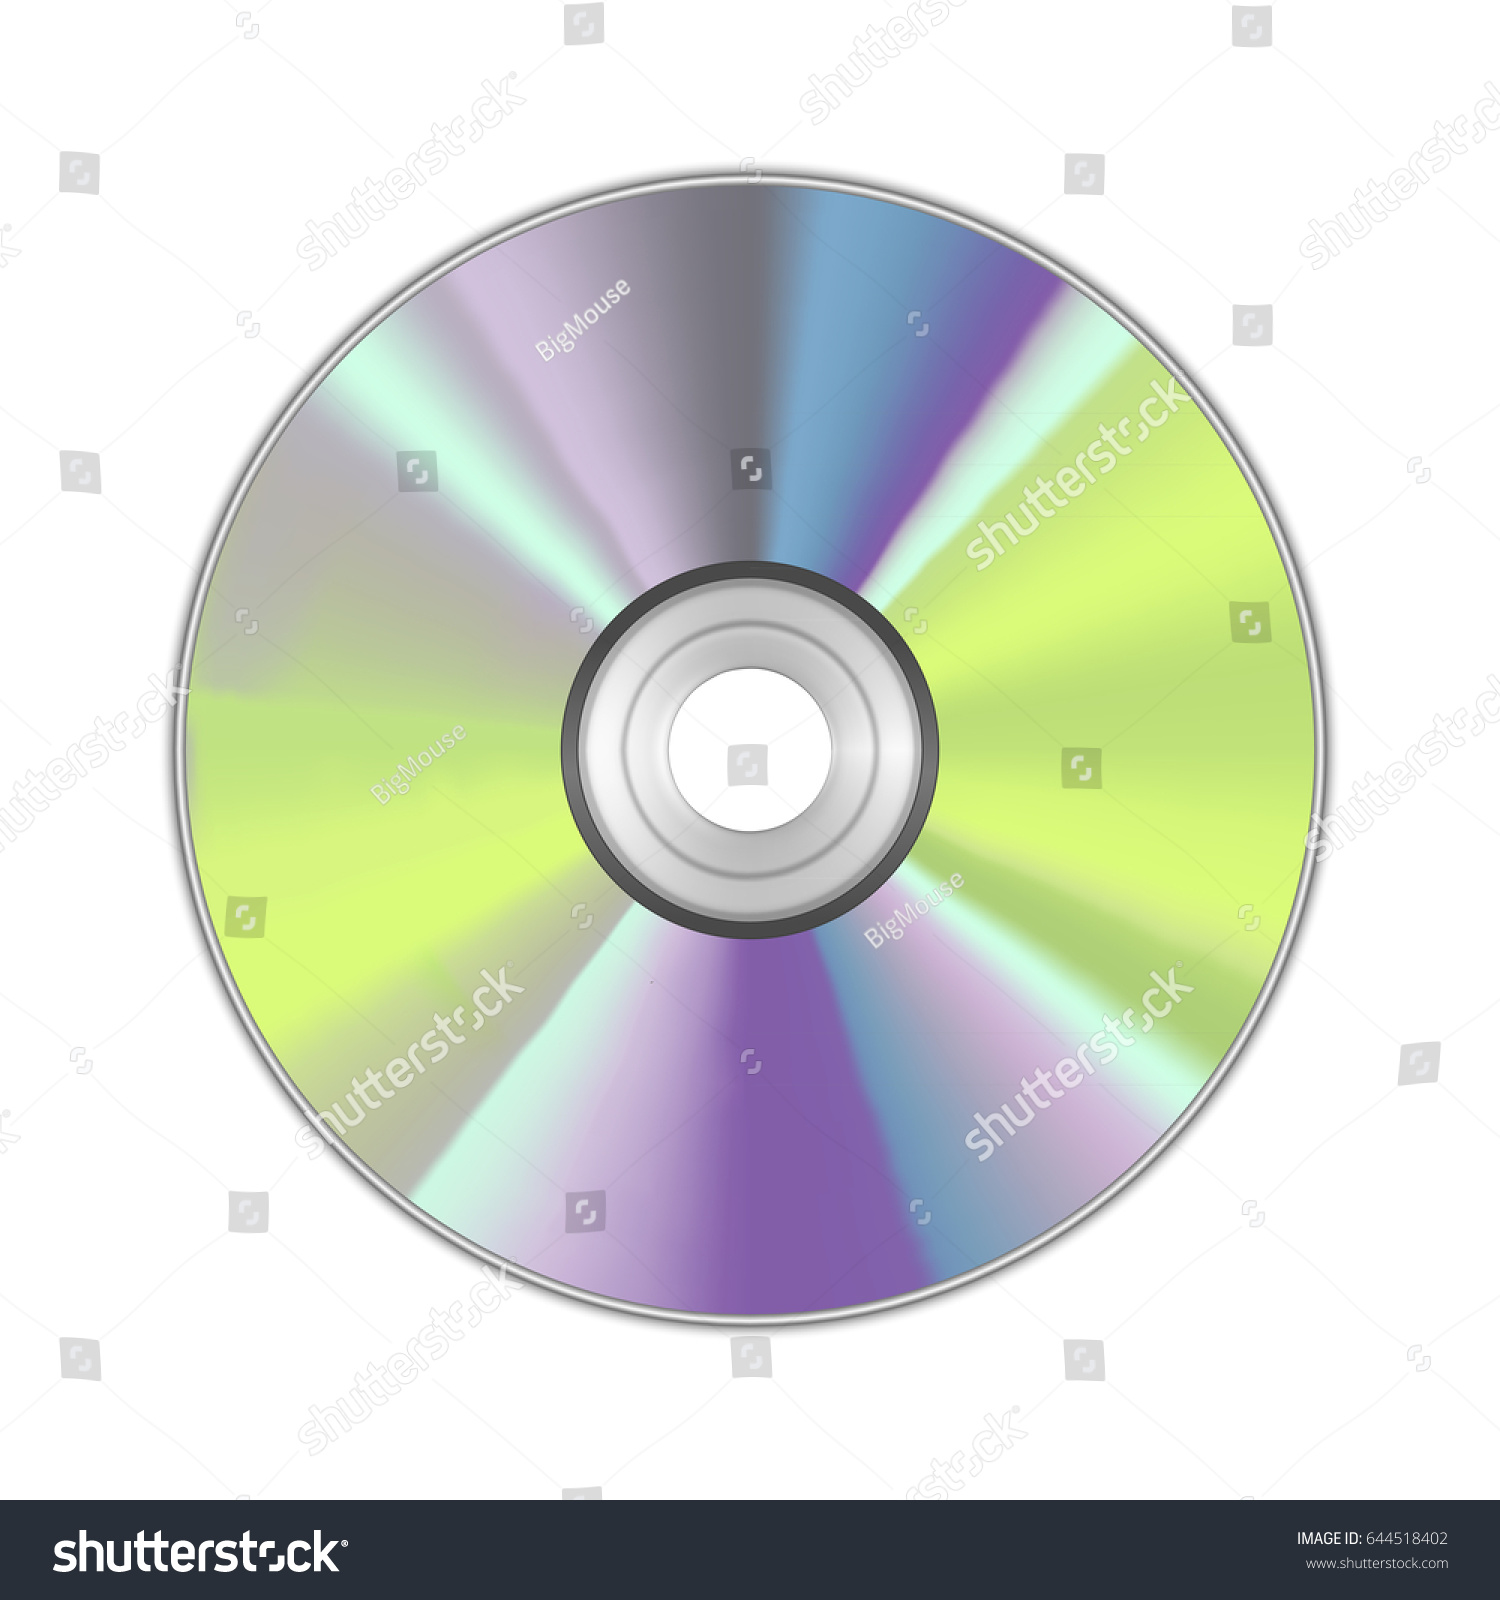 Realistic Detailed Round Cd Disk Data Stock Vector 644518402 ...